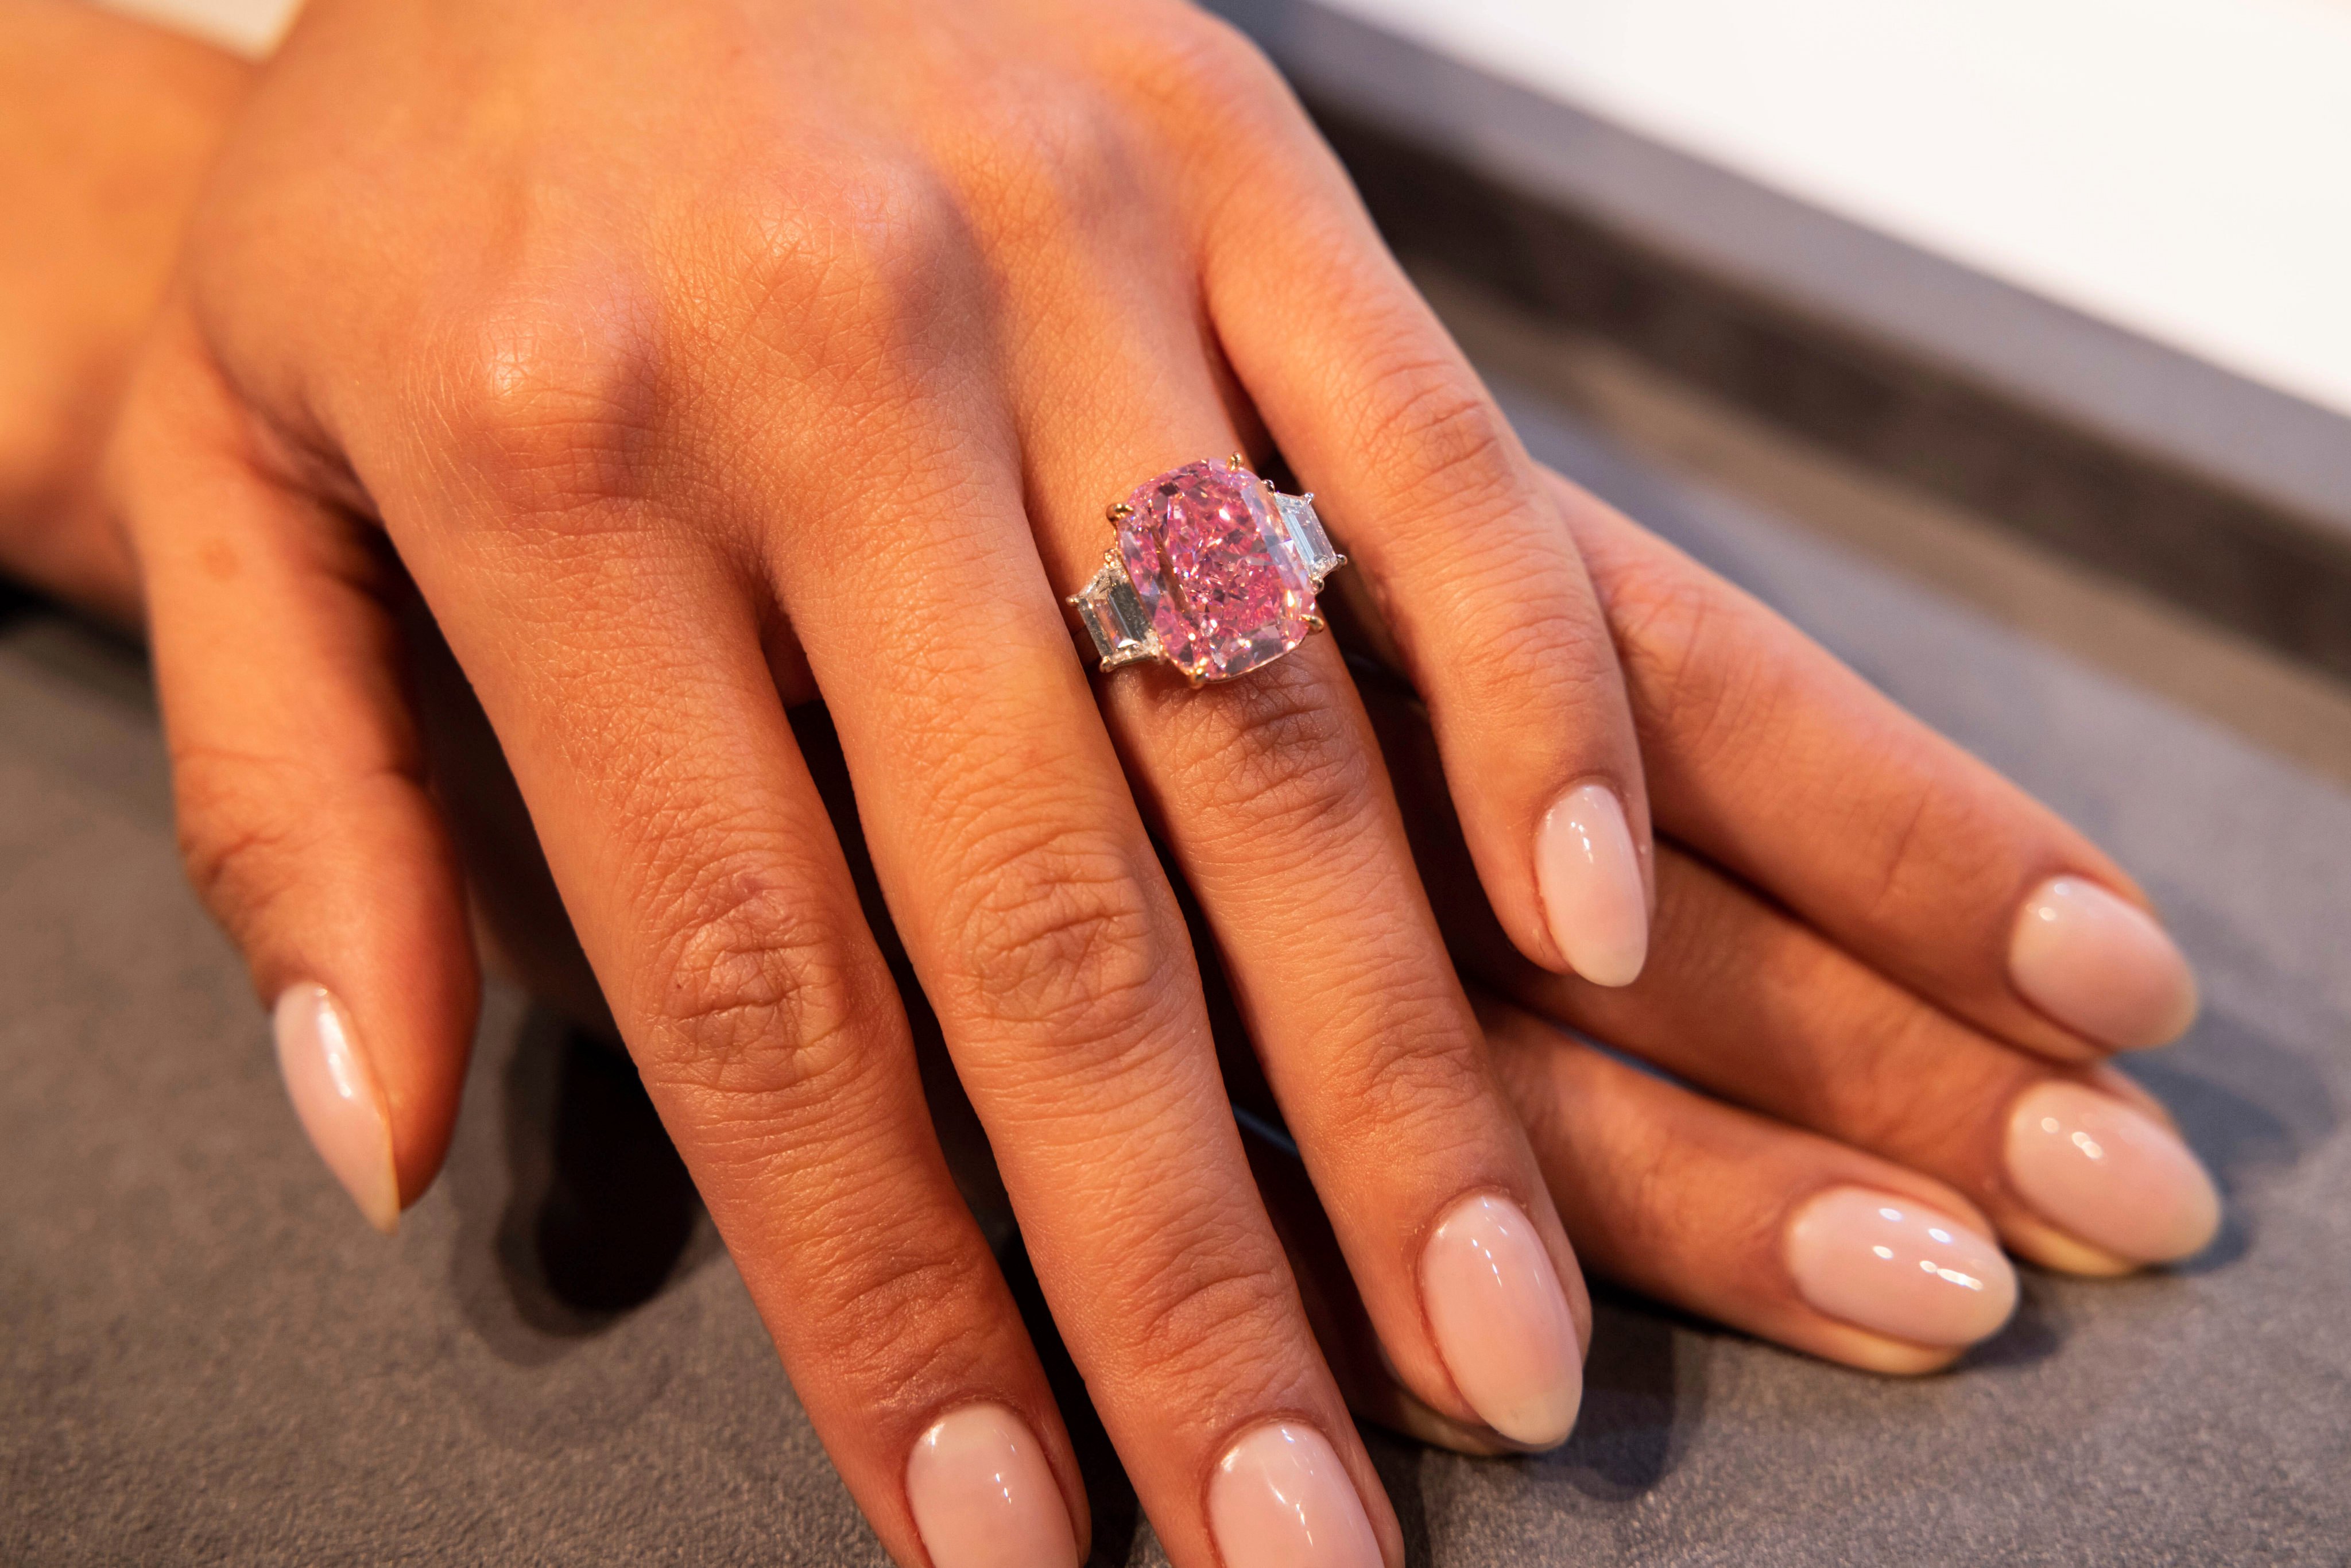 A woman displays the 10.57 carat Eternal Pink diamond at Sotheby’s, on March 27, in New York. Photo: AP Photo